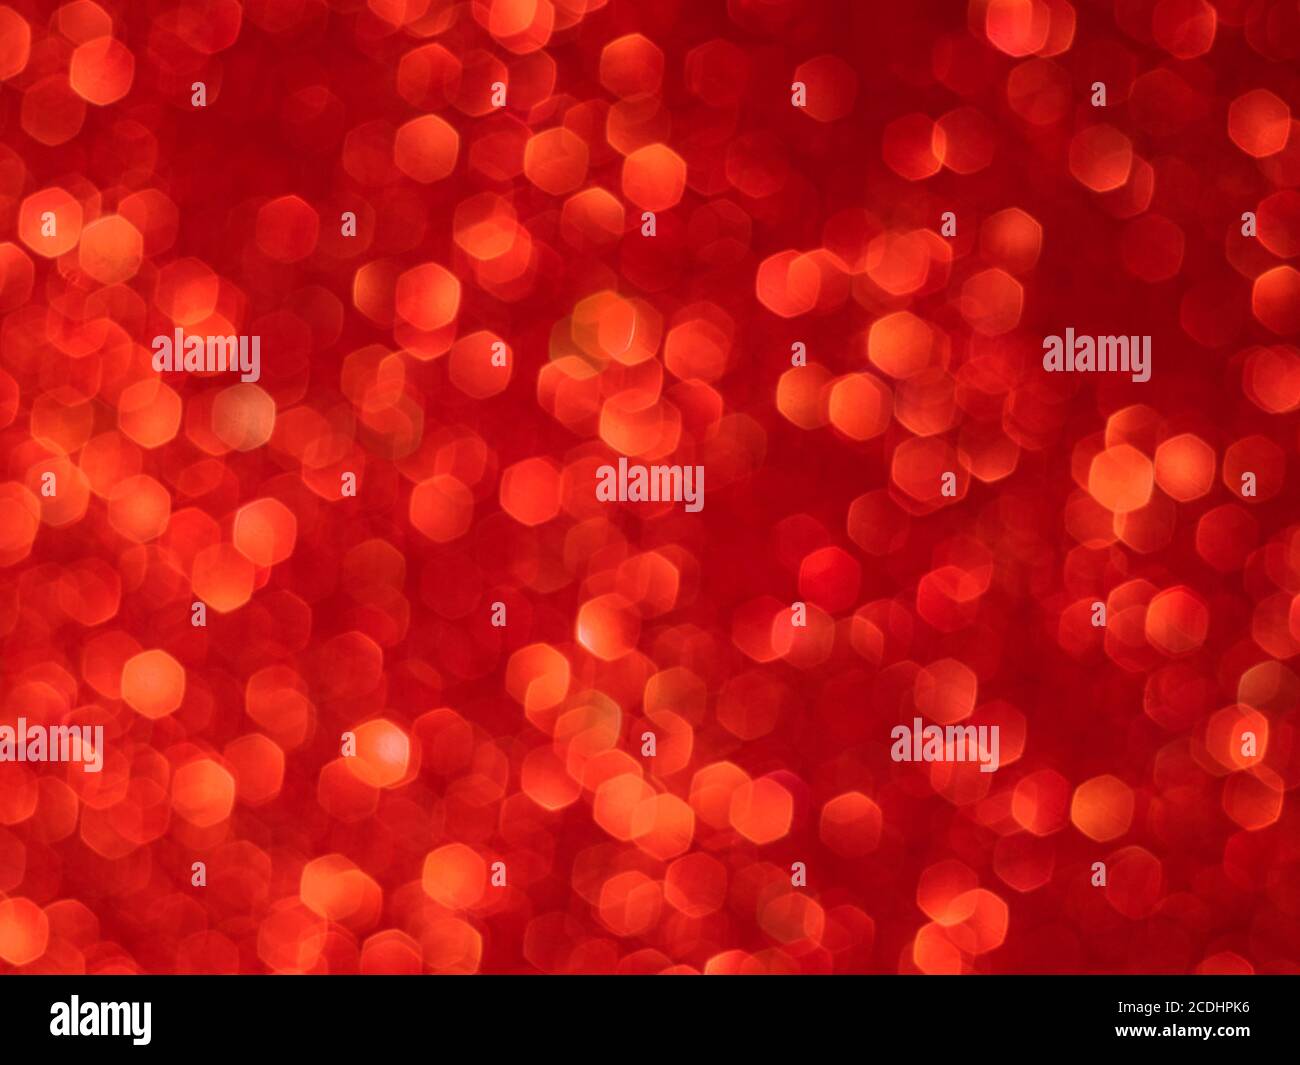 Red bokeh holiday textured glitter background. Blurred abstract holiday background. Stock Photo